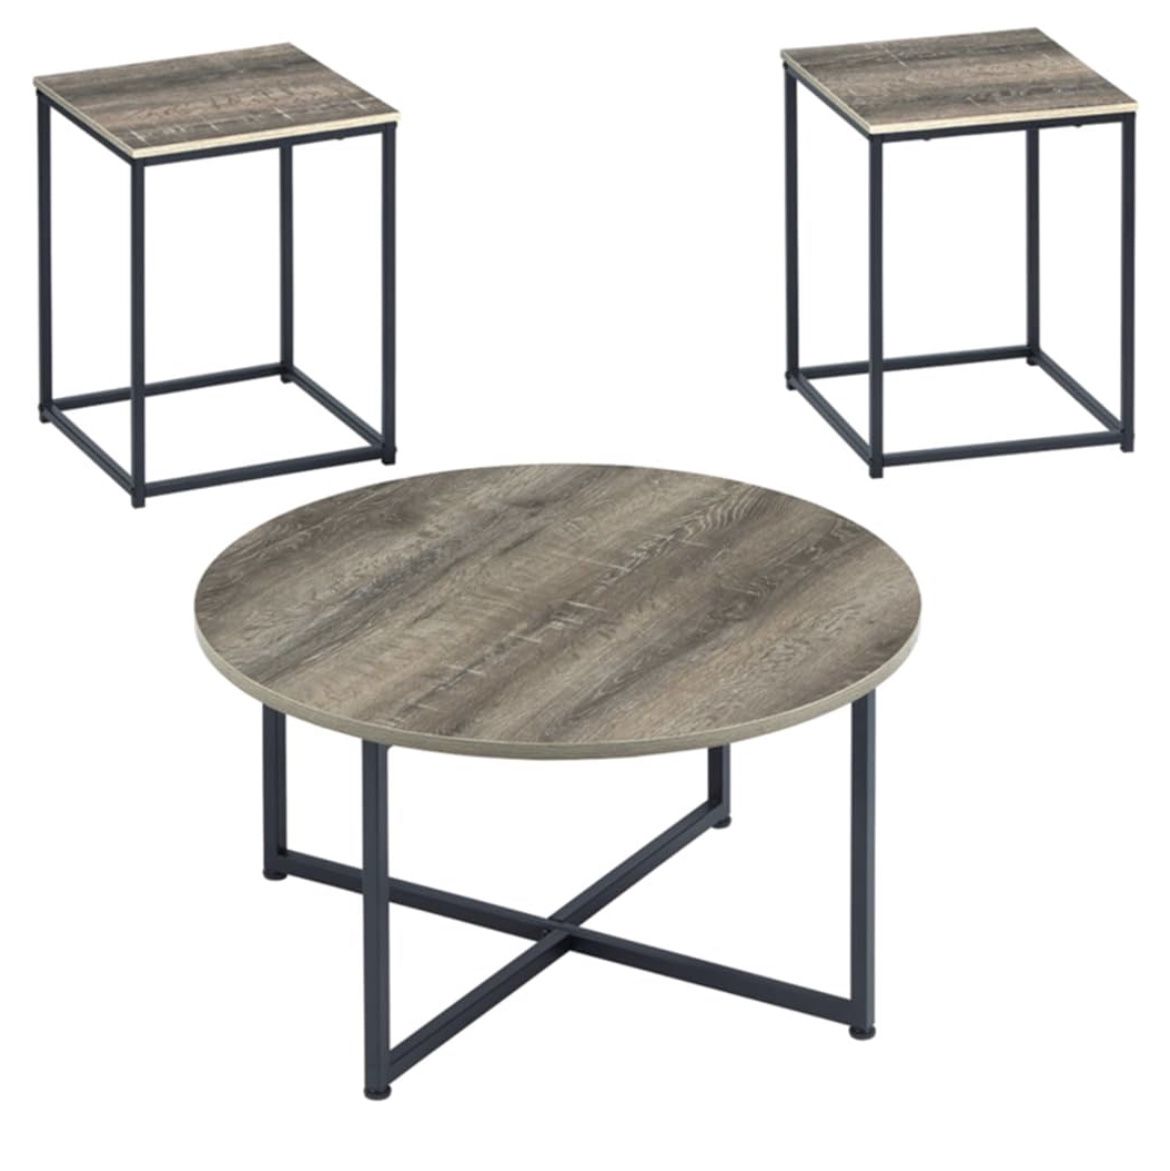 3-Piece Table Set, 1 Coffee Table and 2 End Tables.